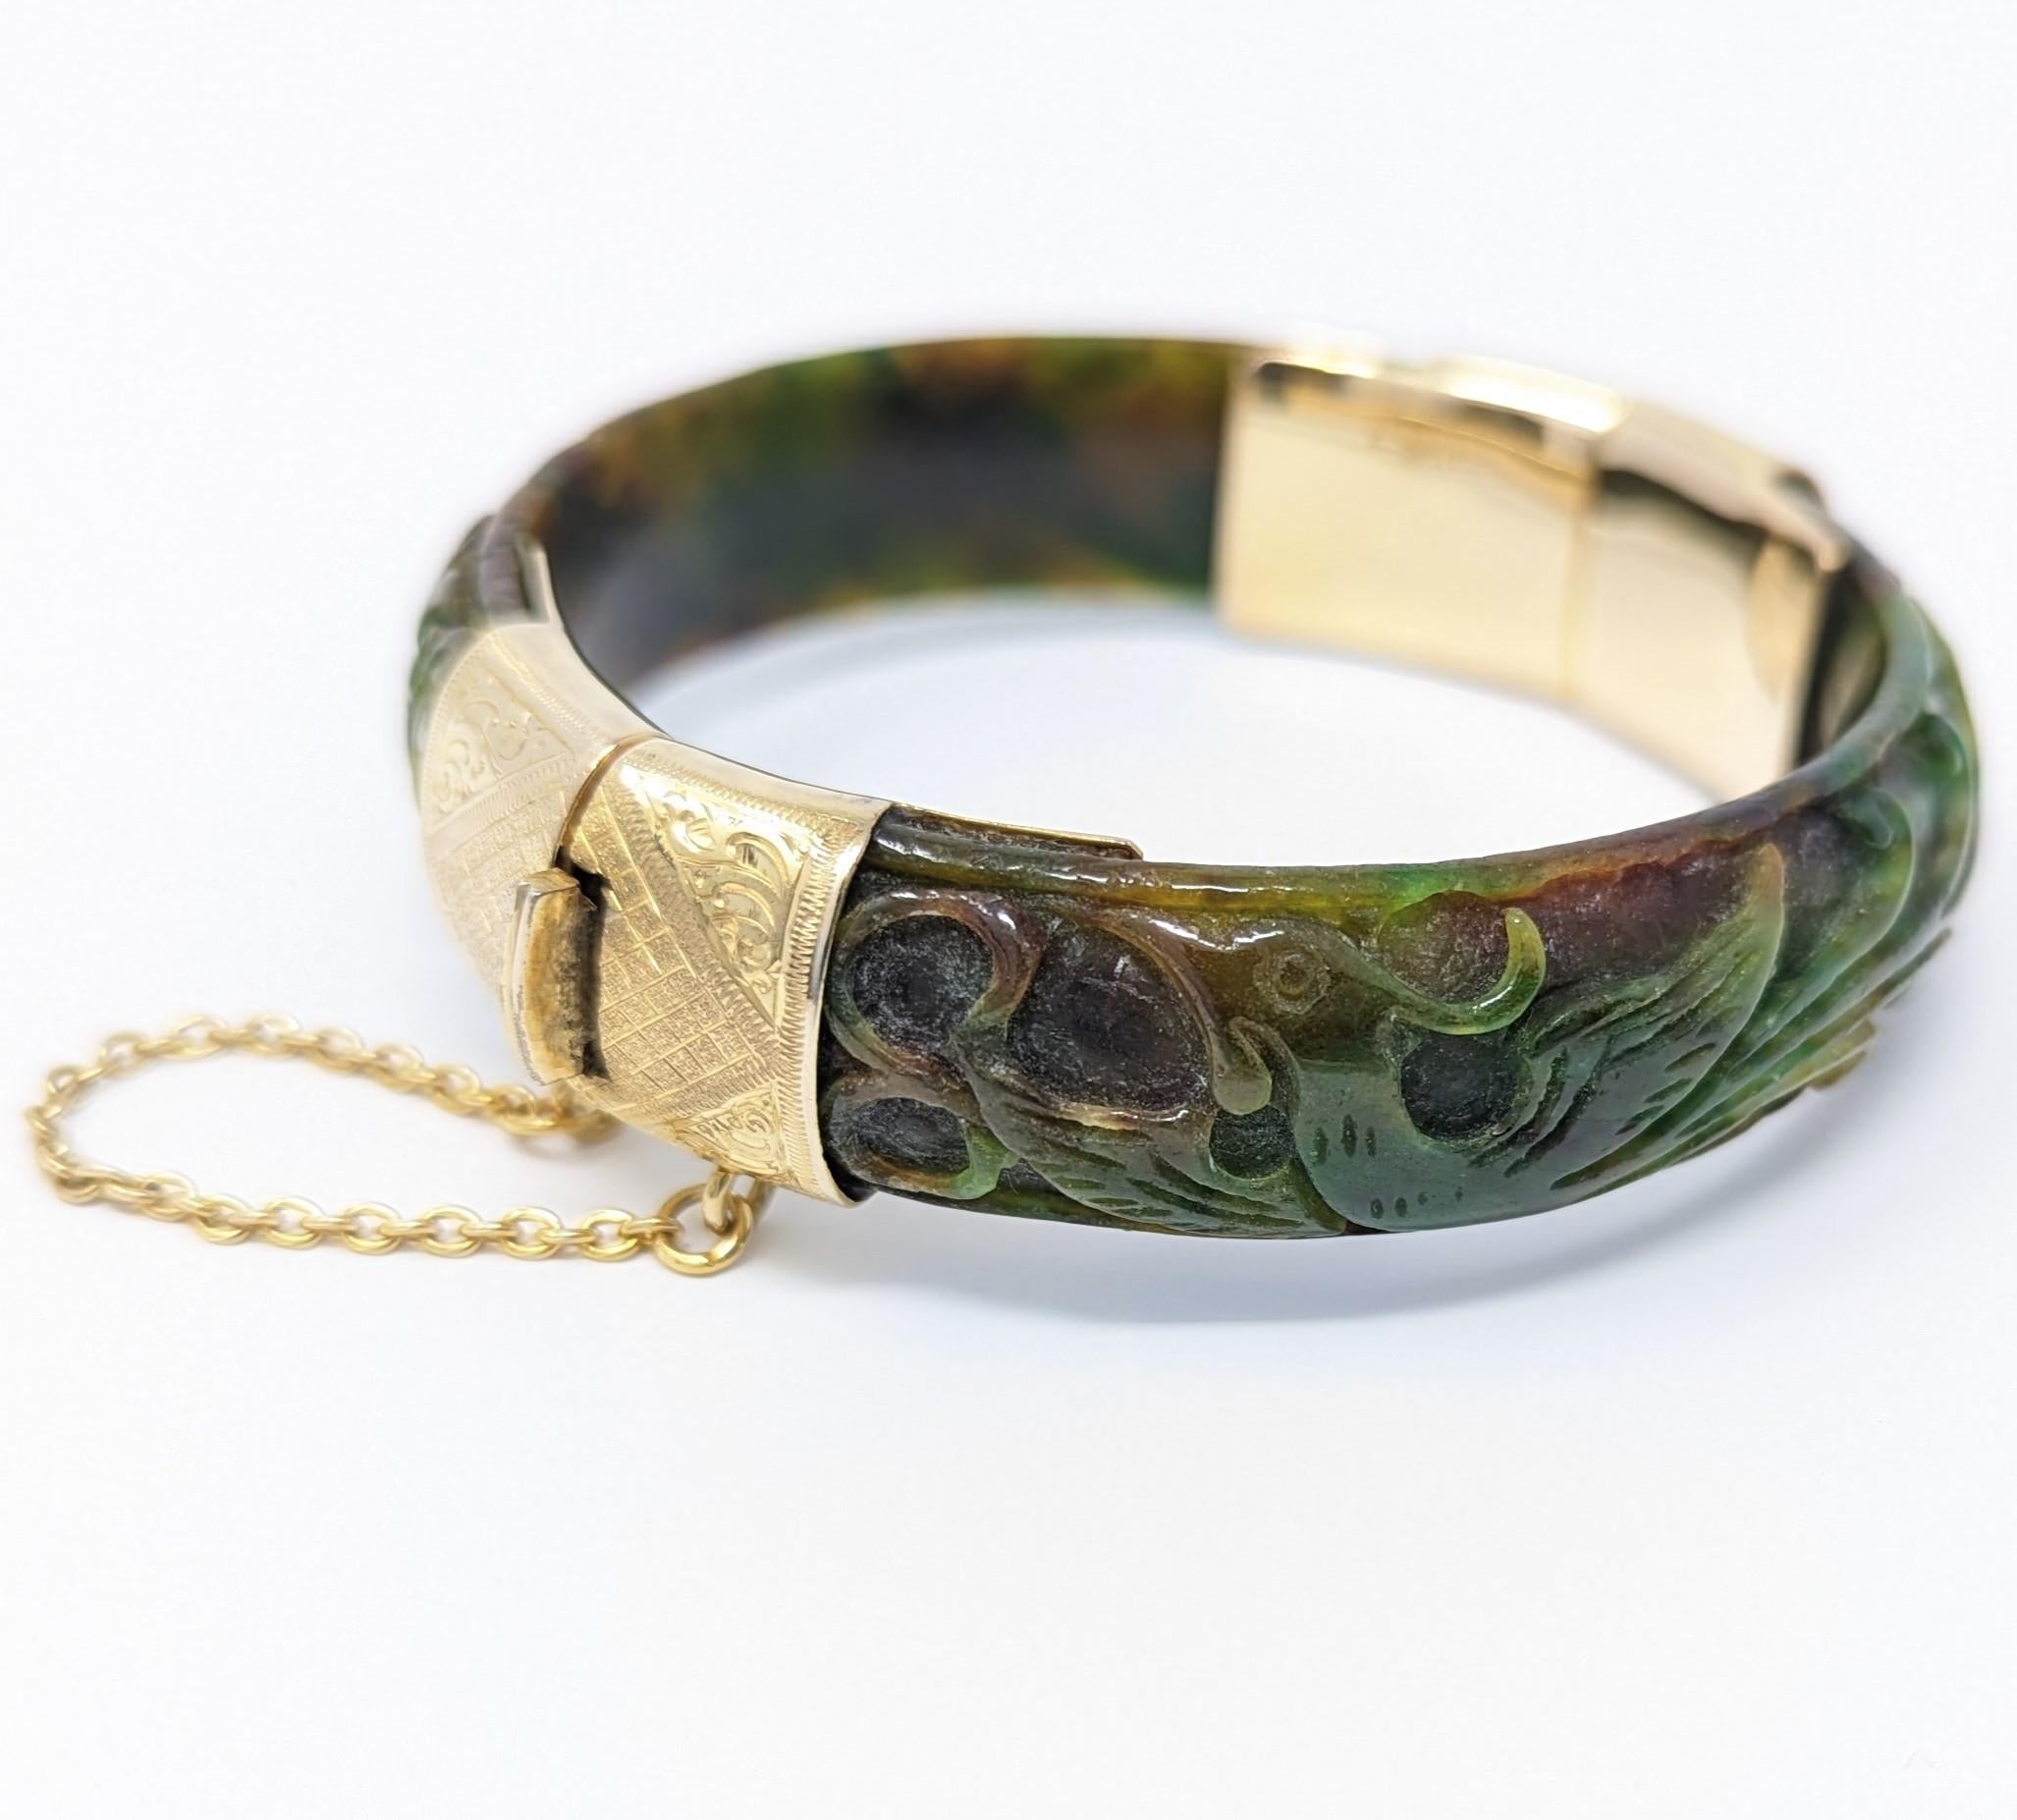 Antique Carved Nephrite Jade 14k Bangle Bracelet 585 Solid Yellow Gold Asian In Good Condition For Sale In Greer, SC